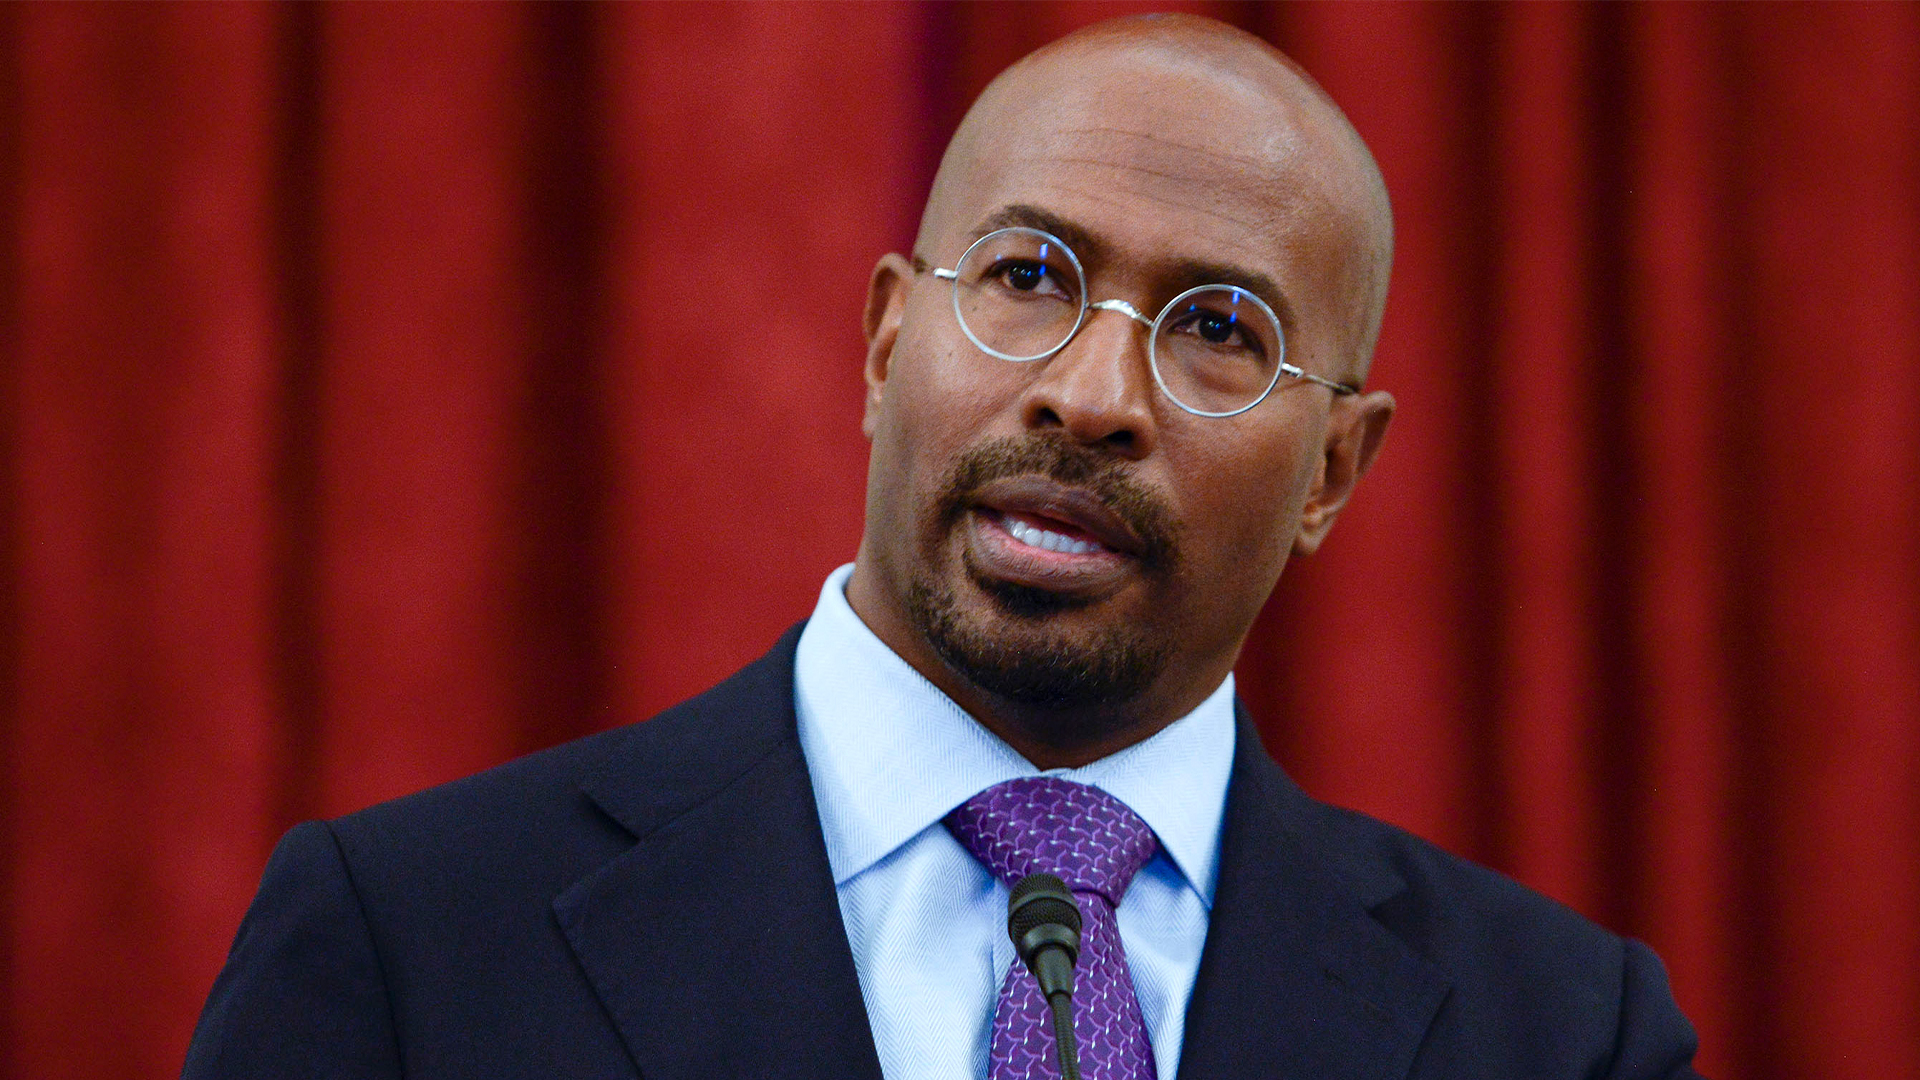 Van Jones Says He Was Going To Be Put 'In An Early Grave' After Receiving $100M From Jeff Bezos